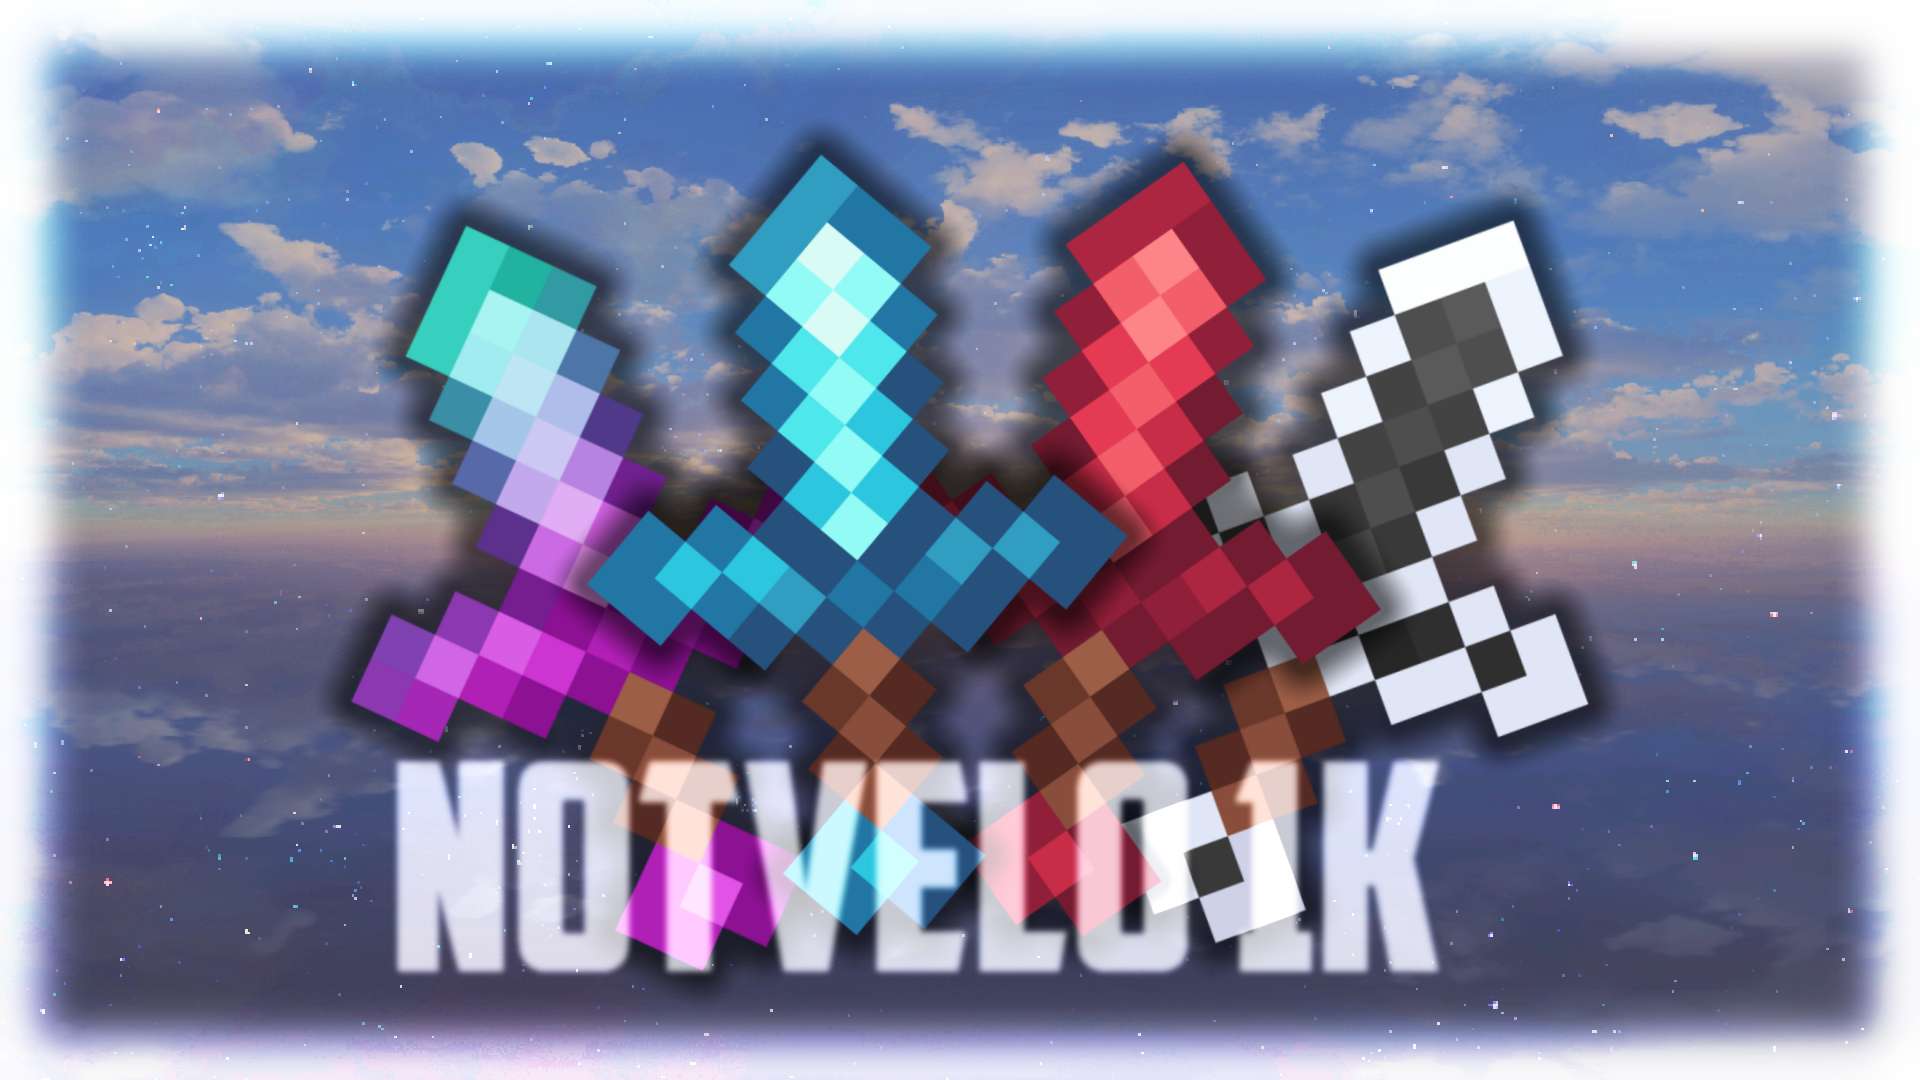 Gallery Banner for NotVelo 1k - Default on PvPRP